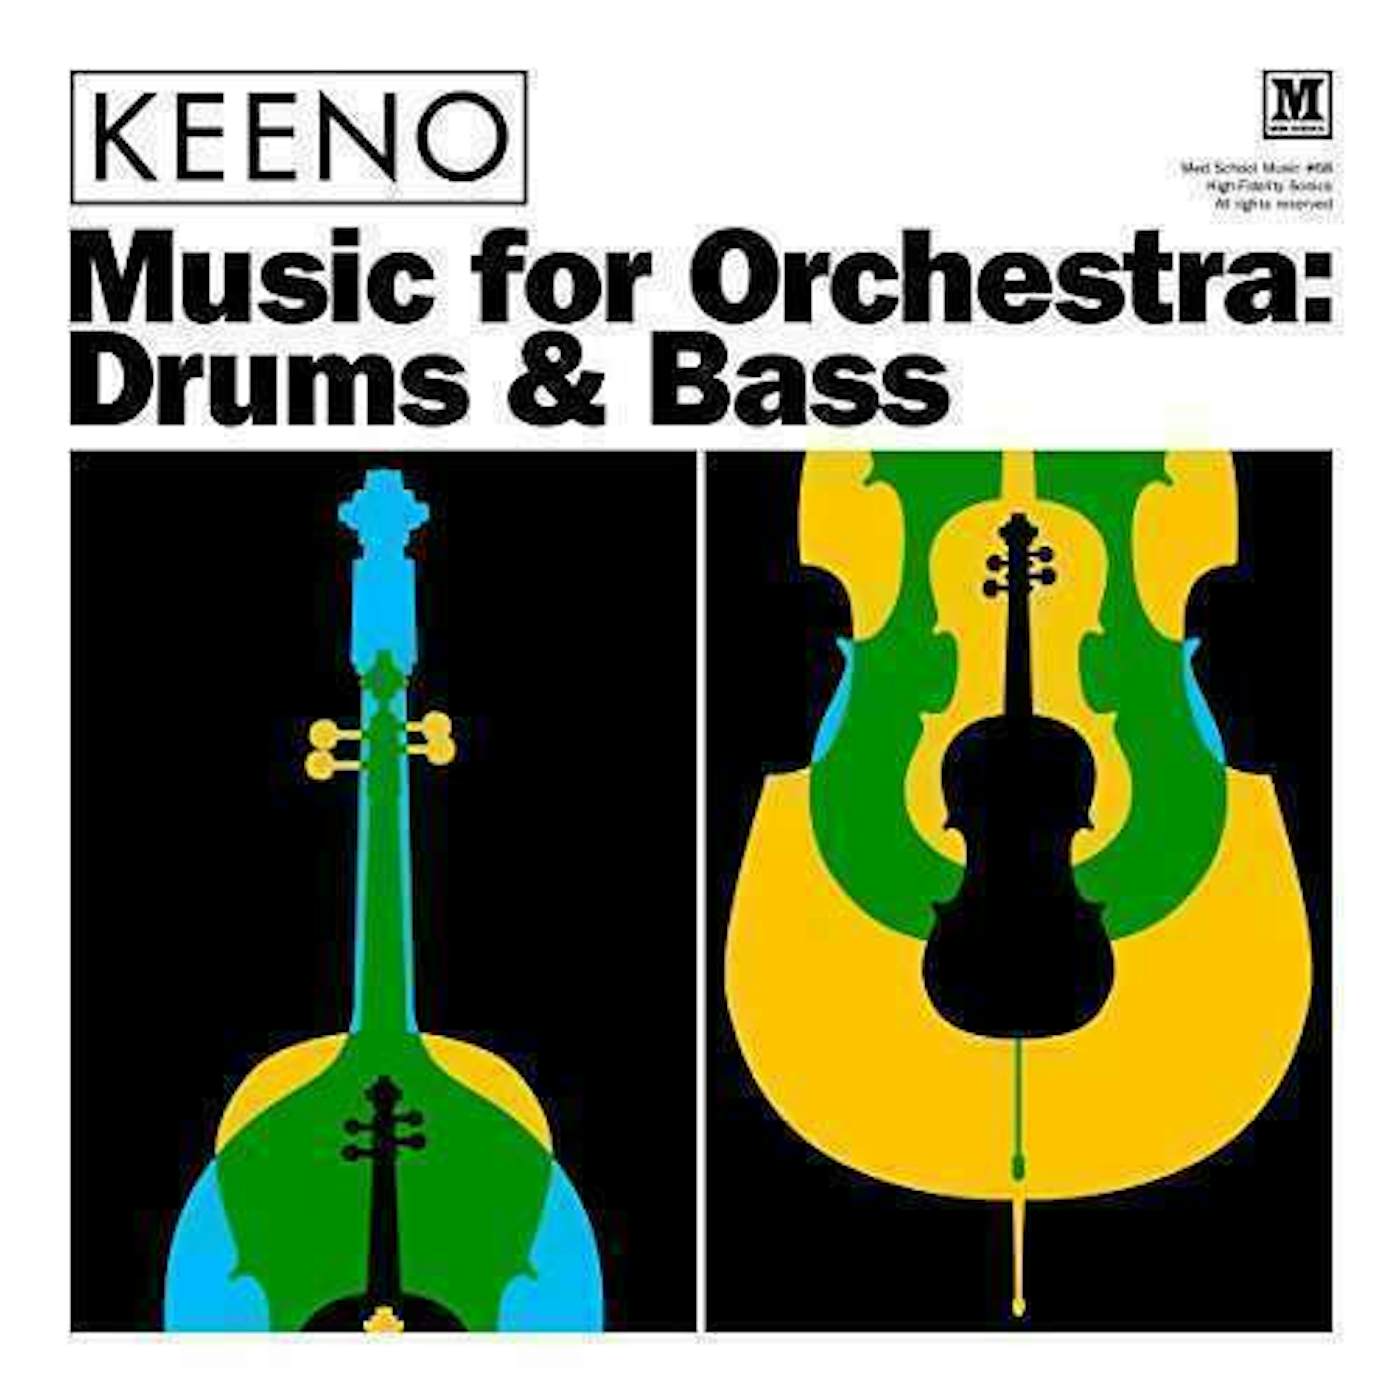 Keeno Music For Orchestra:Drum & Bass Vinyl Record